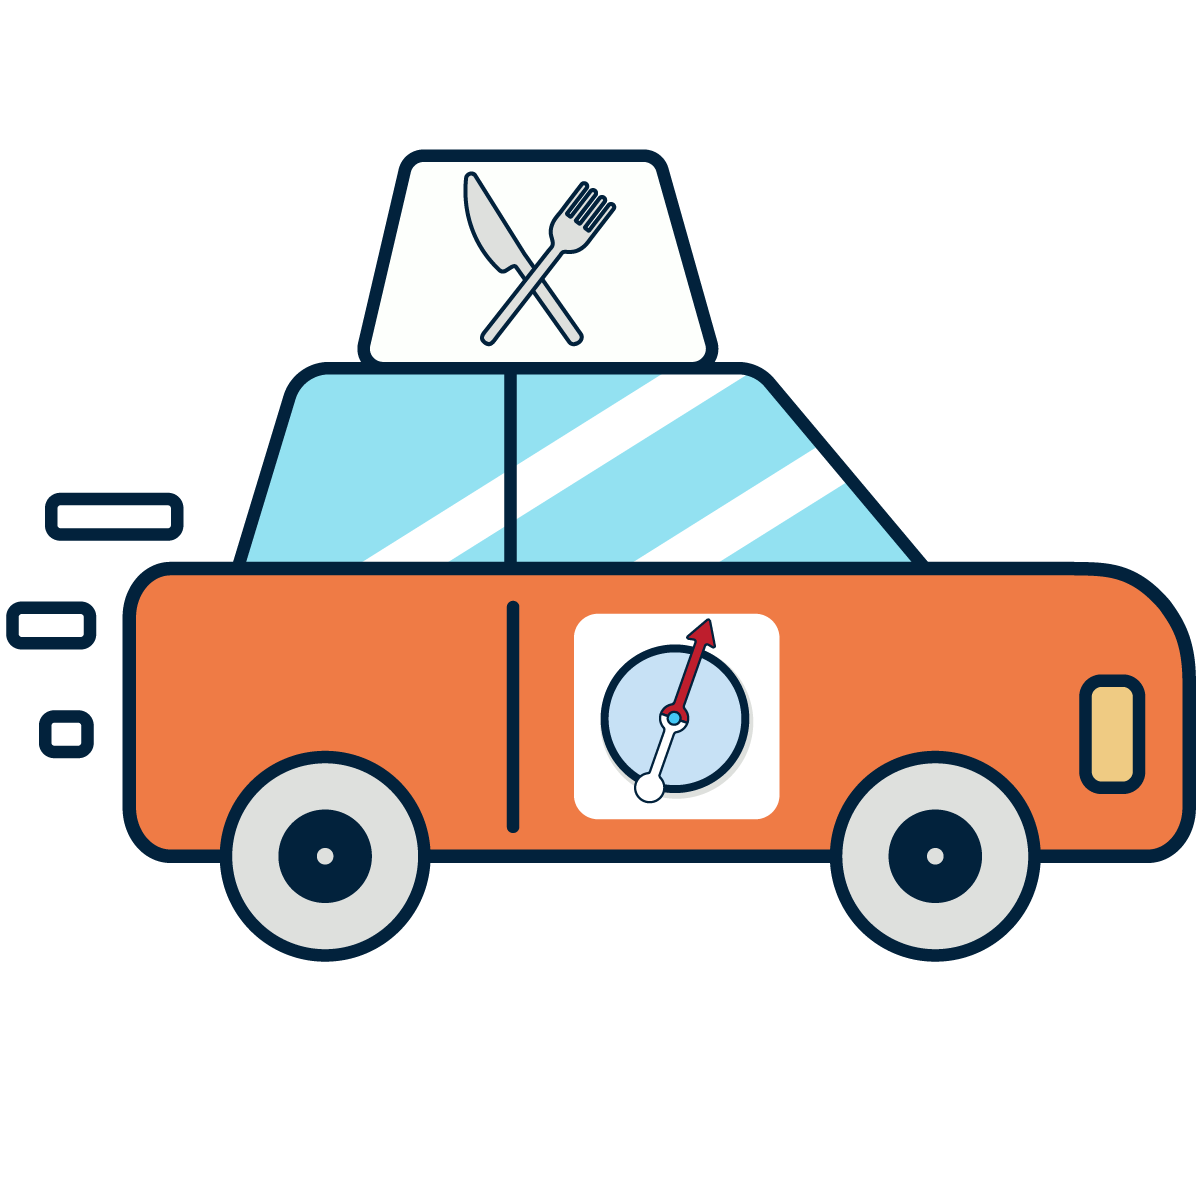 sourcepoint_icons_noBG_mealsonwheels